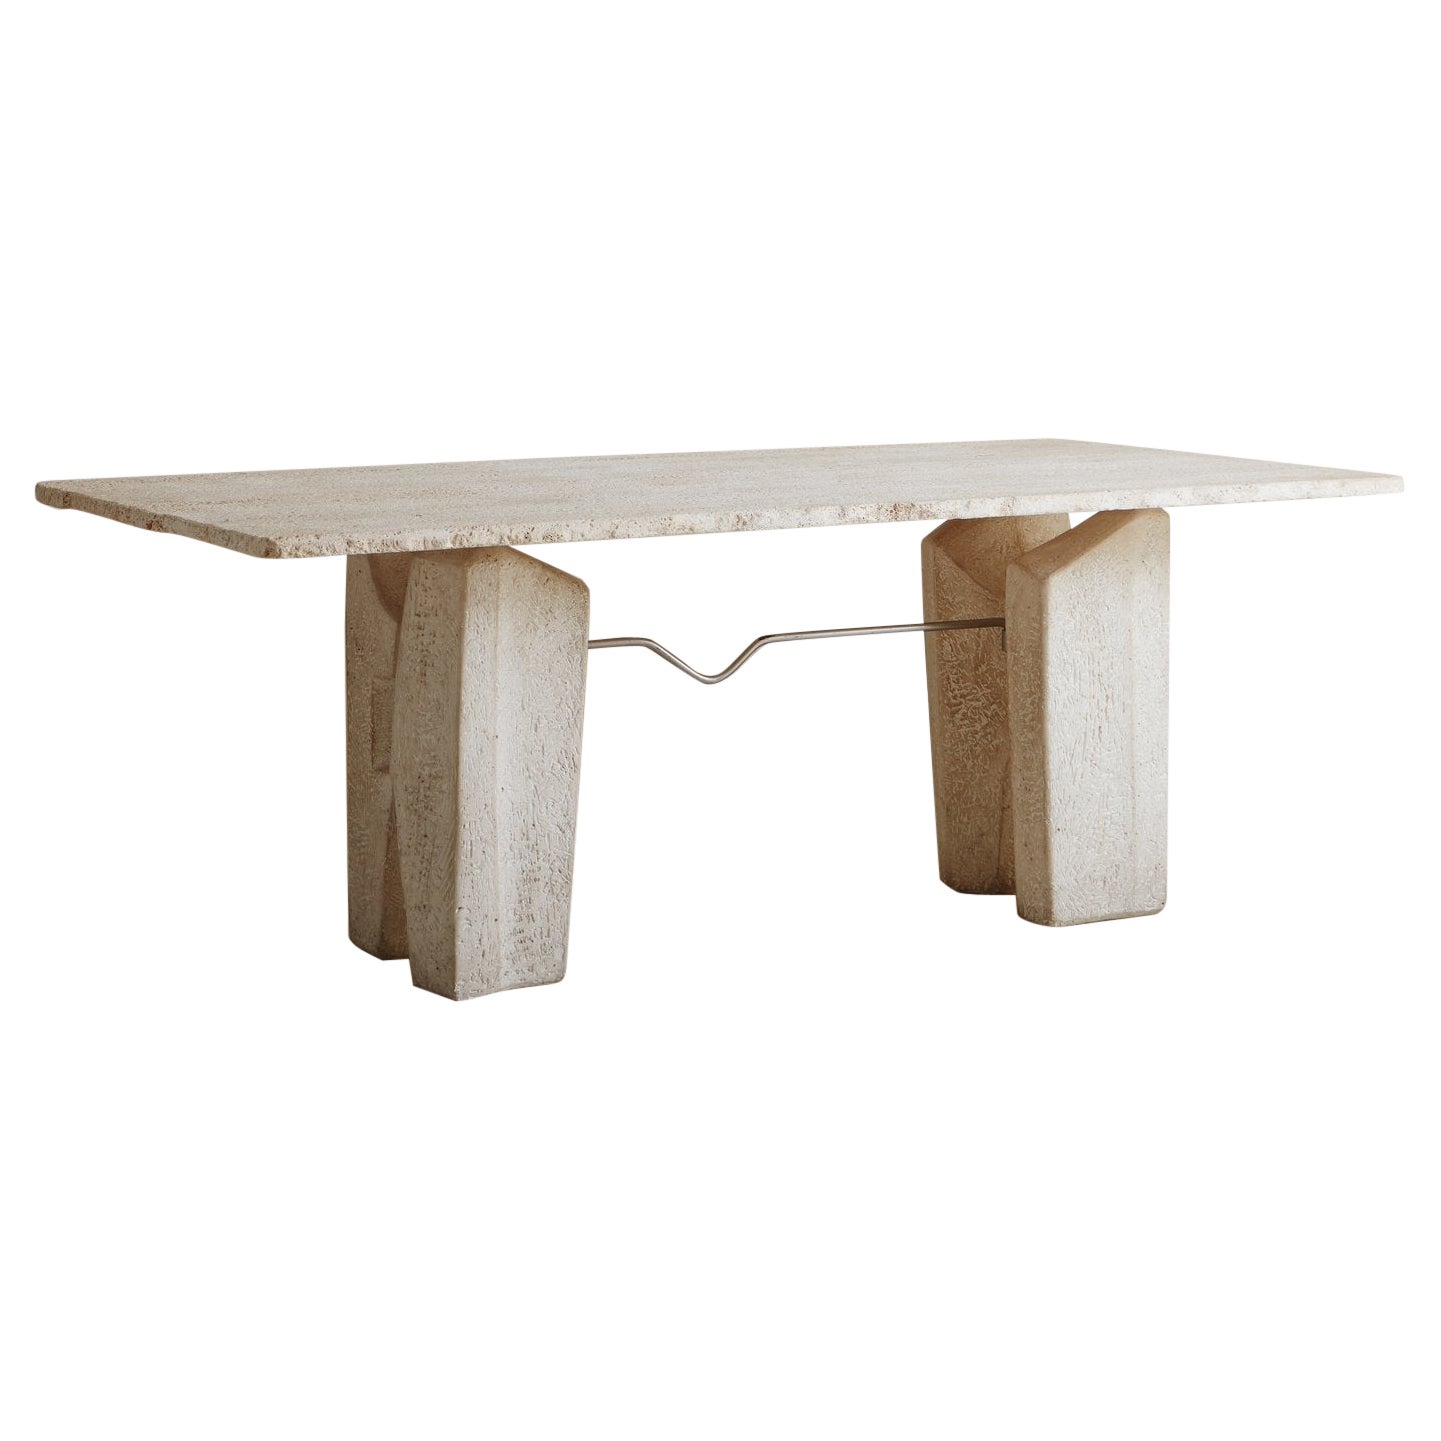 Sculptural Travertine Dining Table with Chrome Detail, Italy 1970s